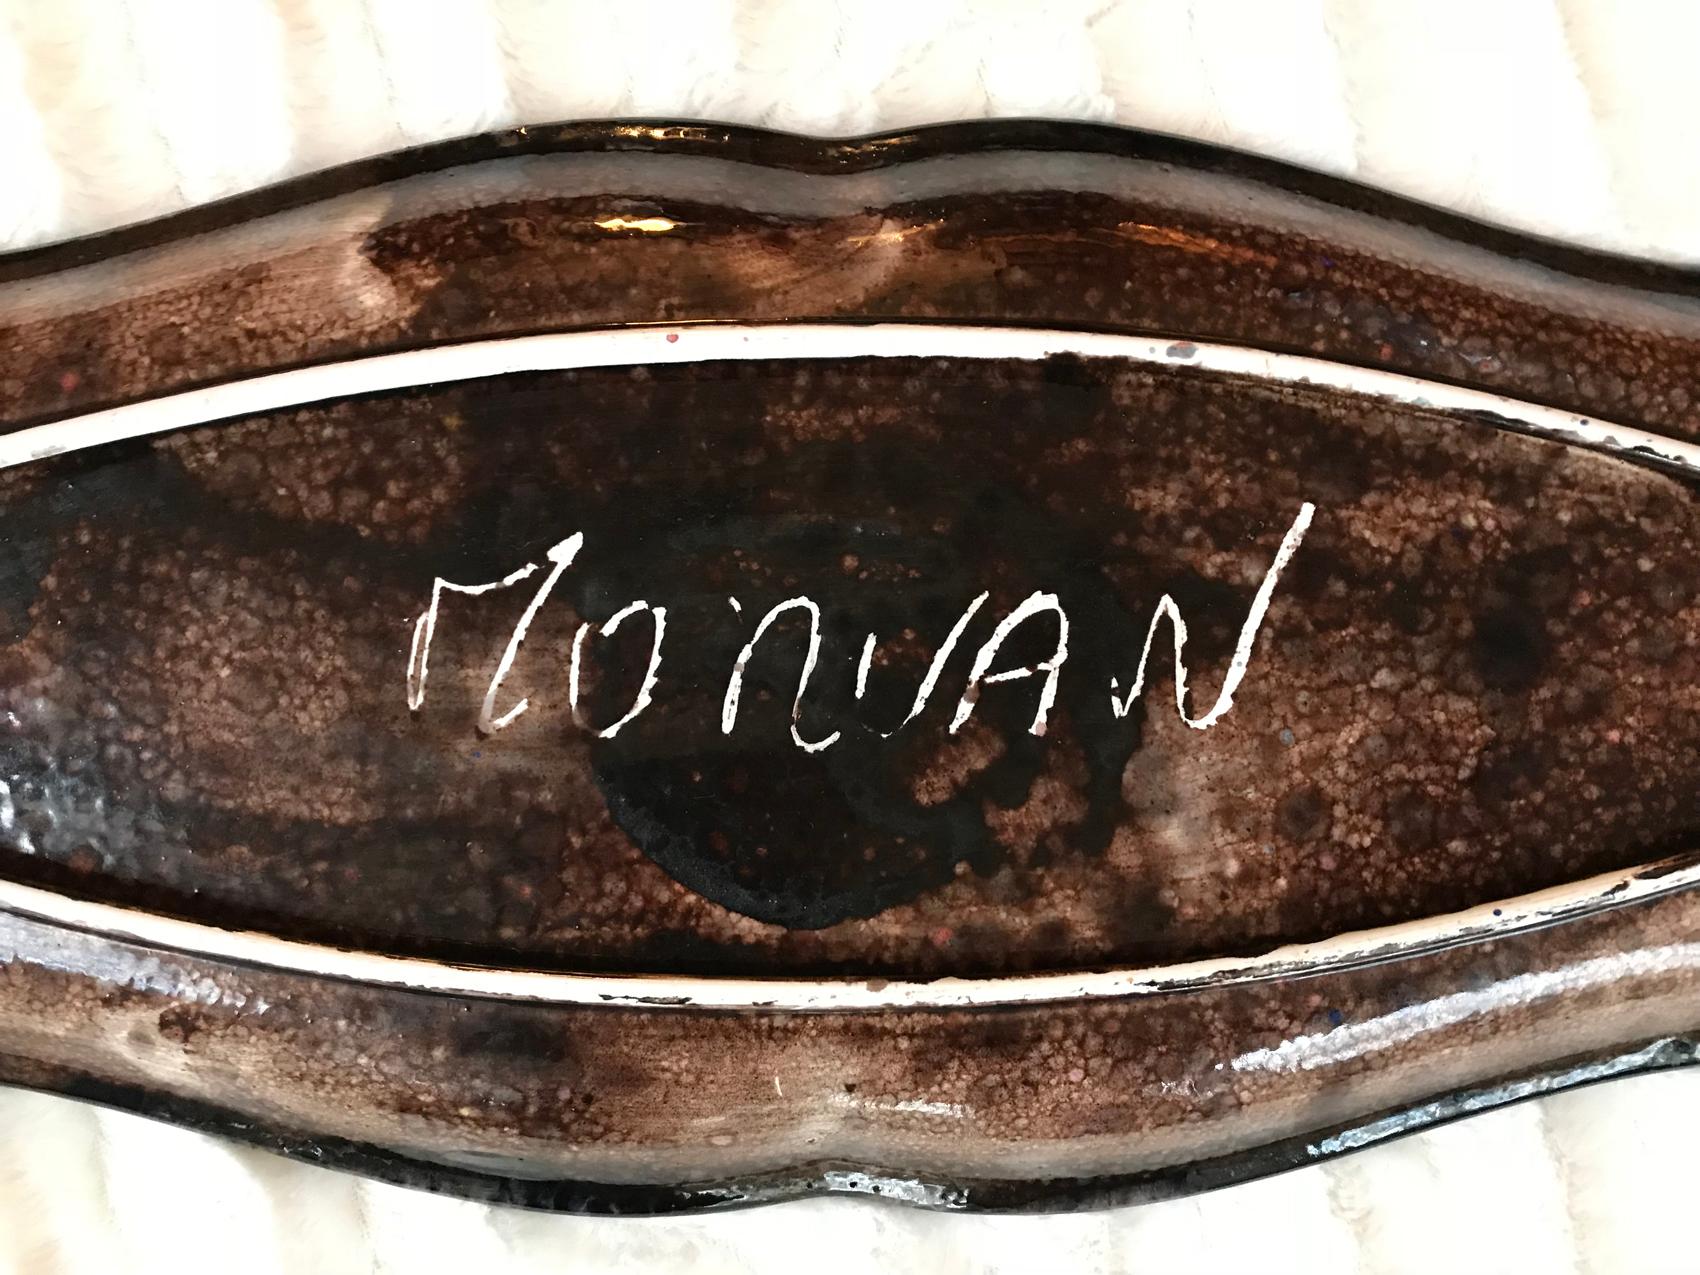 Ceramic Mid-Century Modern Fish Serving Plate by Vallauris Signed Morvan, France, 1950s For Sale